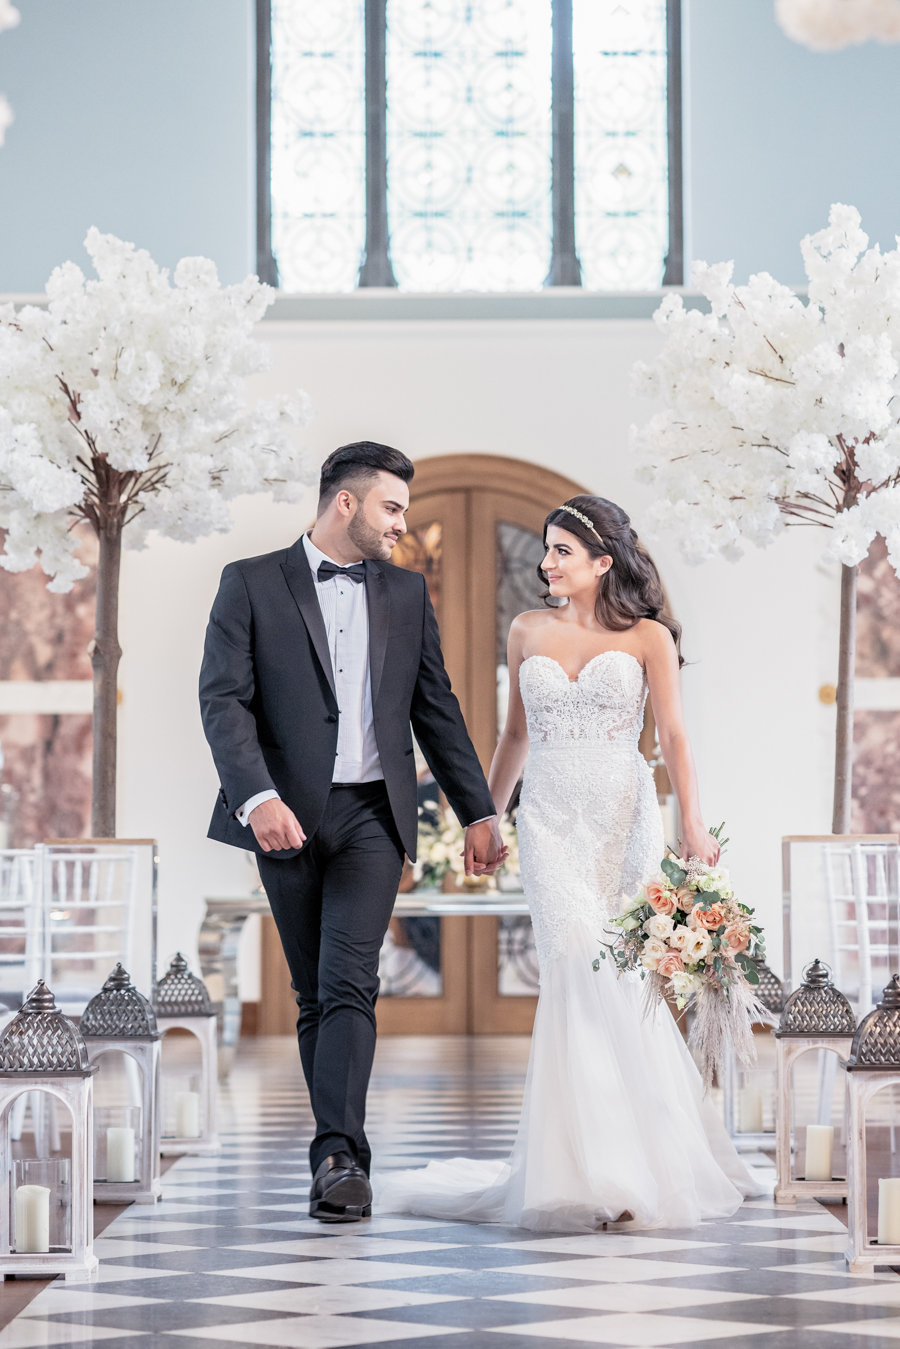 A luxuriously glam British-Indian wedding editorial in a grand English mansion hall